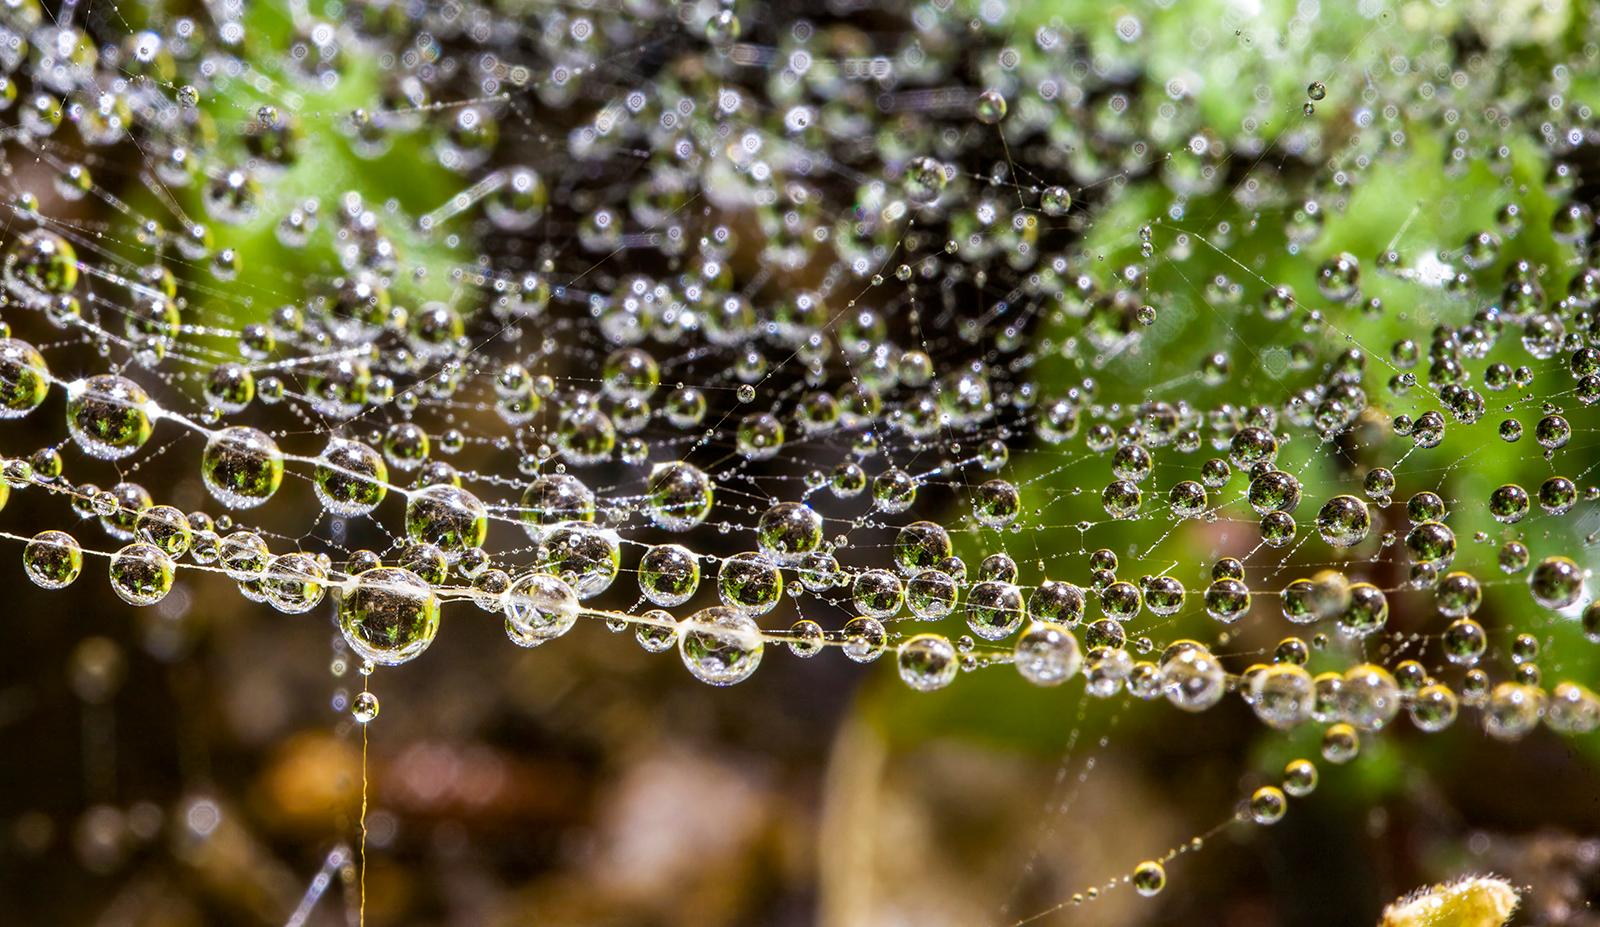 Droplets 1 - Nature limited edition print, Floral green brown, Contemporary - Photograph by Sam Thomas